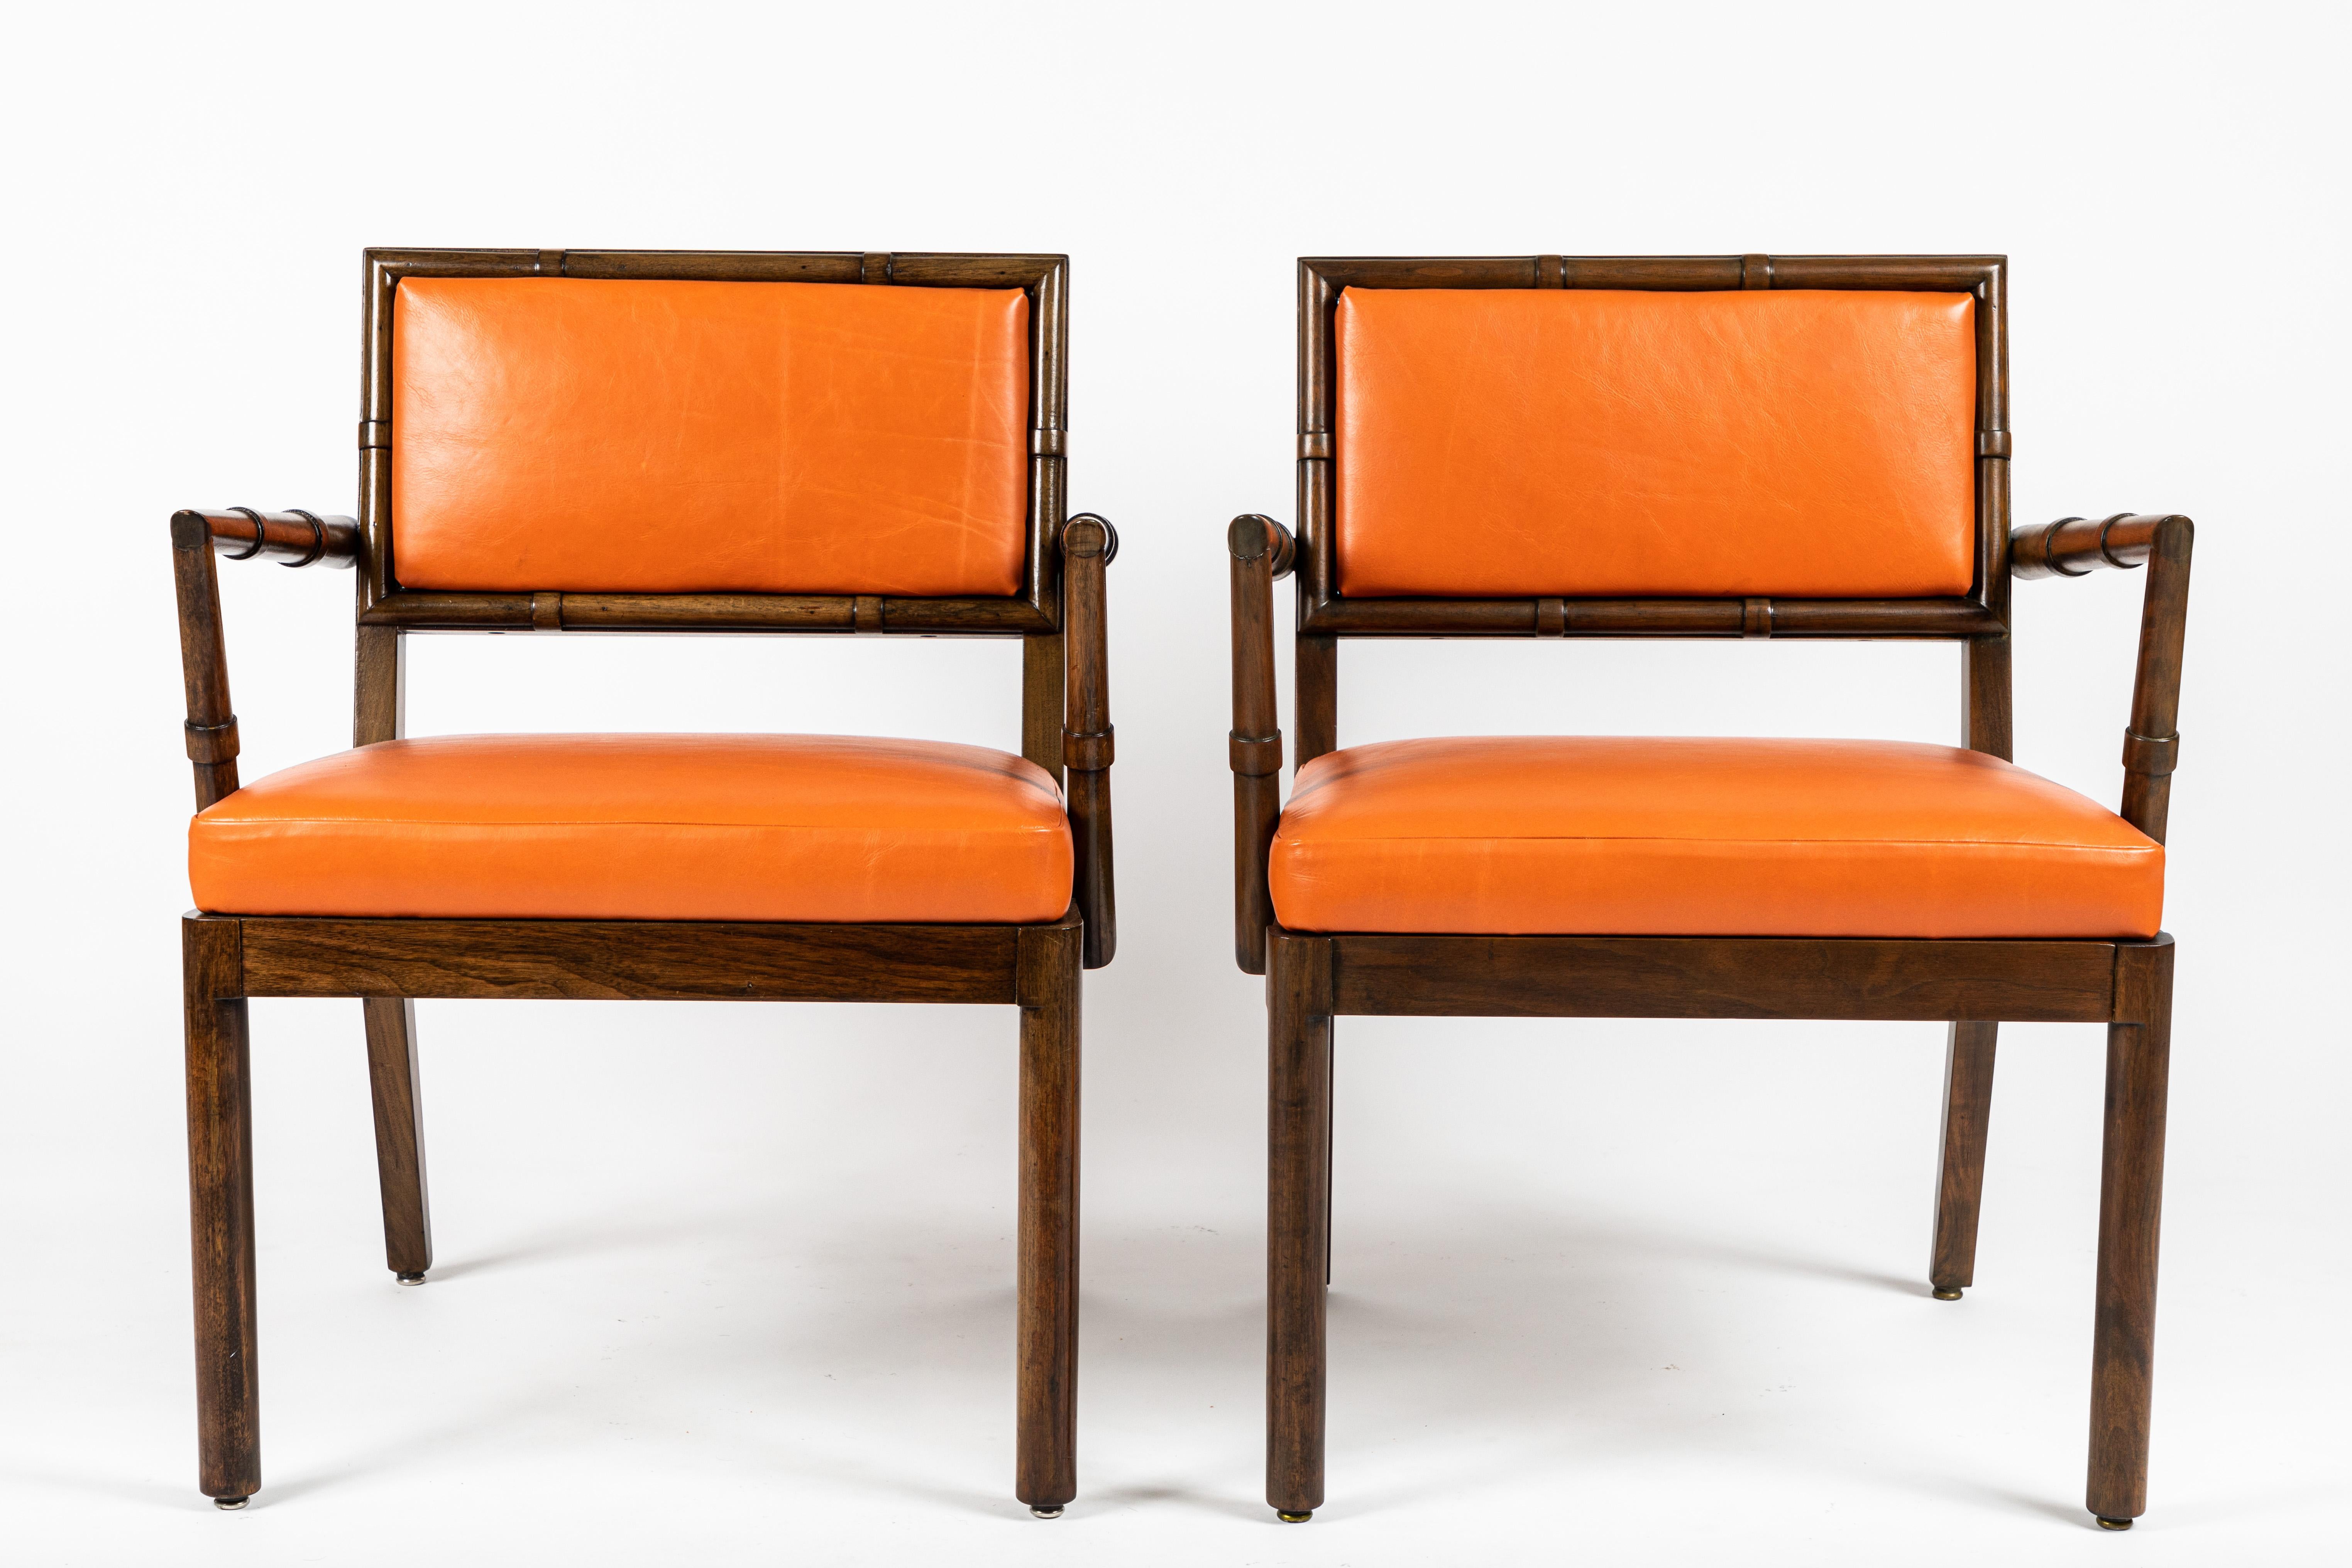 A Classic design, these armchairs we used on quite a few Haines commissions. The arms and back feature a stylized bamboo motif. The upholstered seats are newly redone in an orange leather. There are slight variations in the two chairs most notably